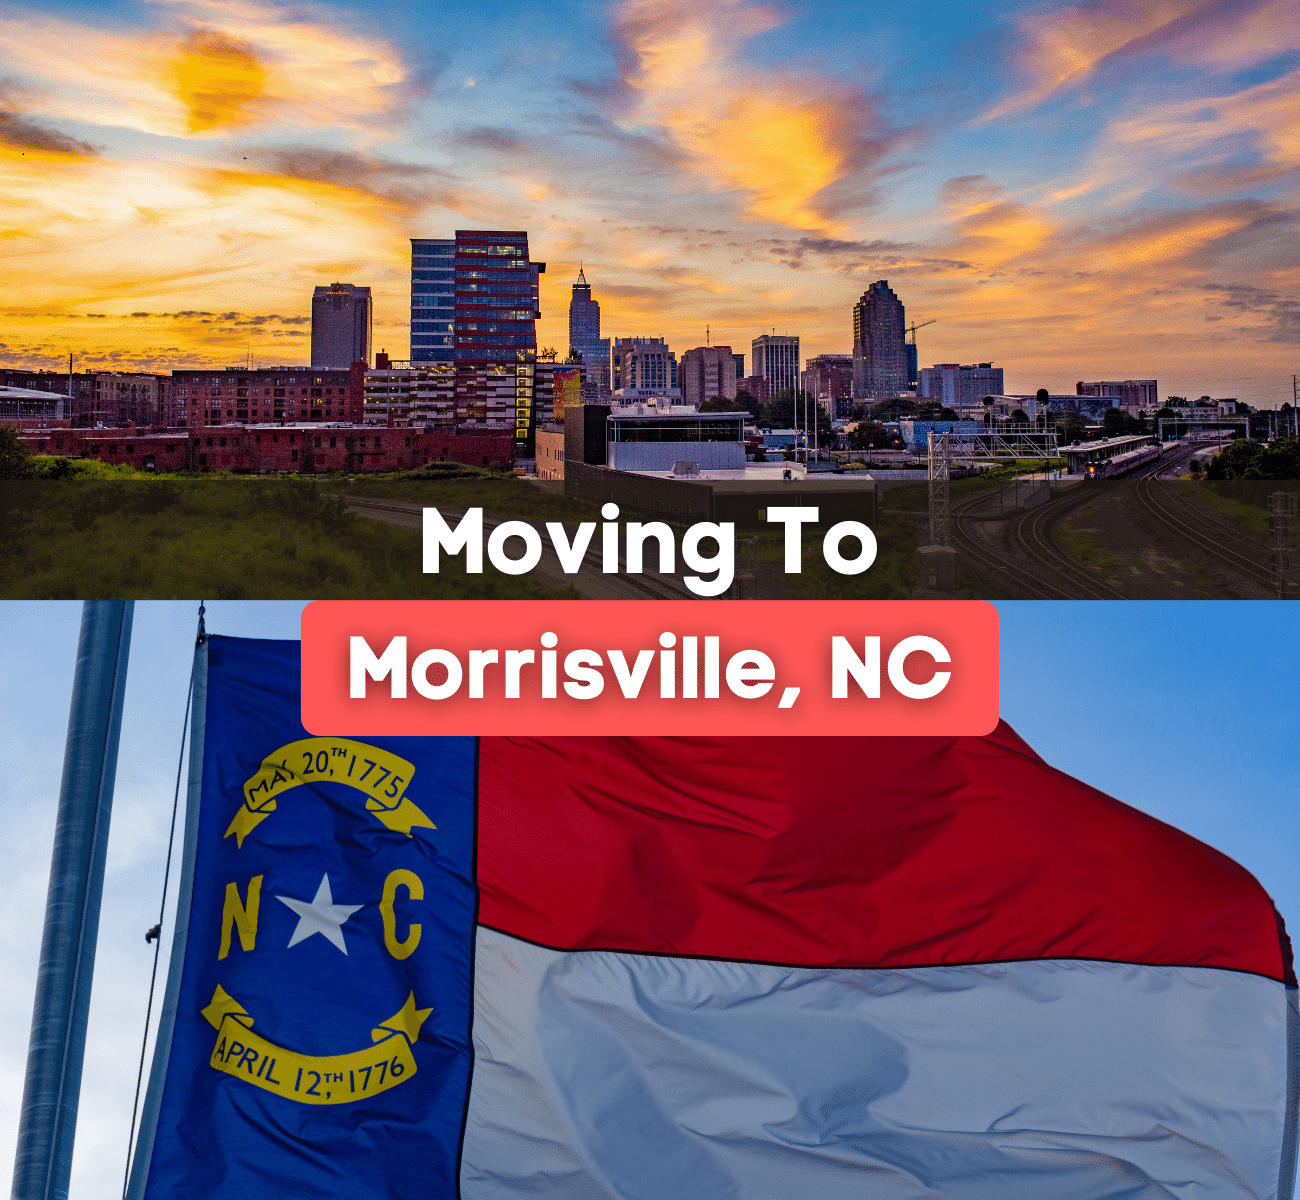 Moving to Morrisville NC - What is it like living in Morrisville North Carolina?